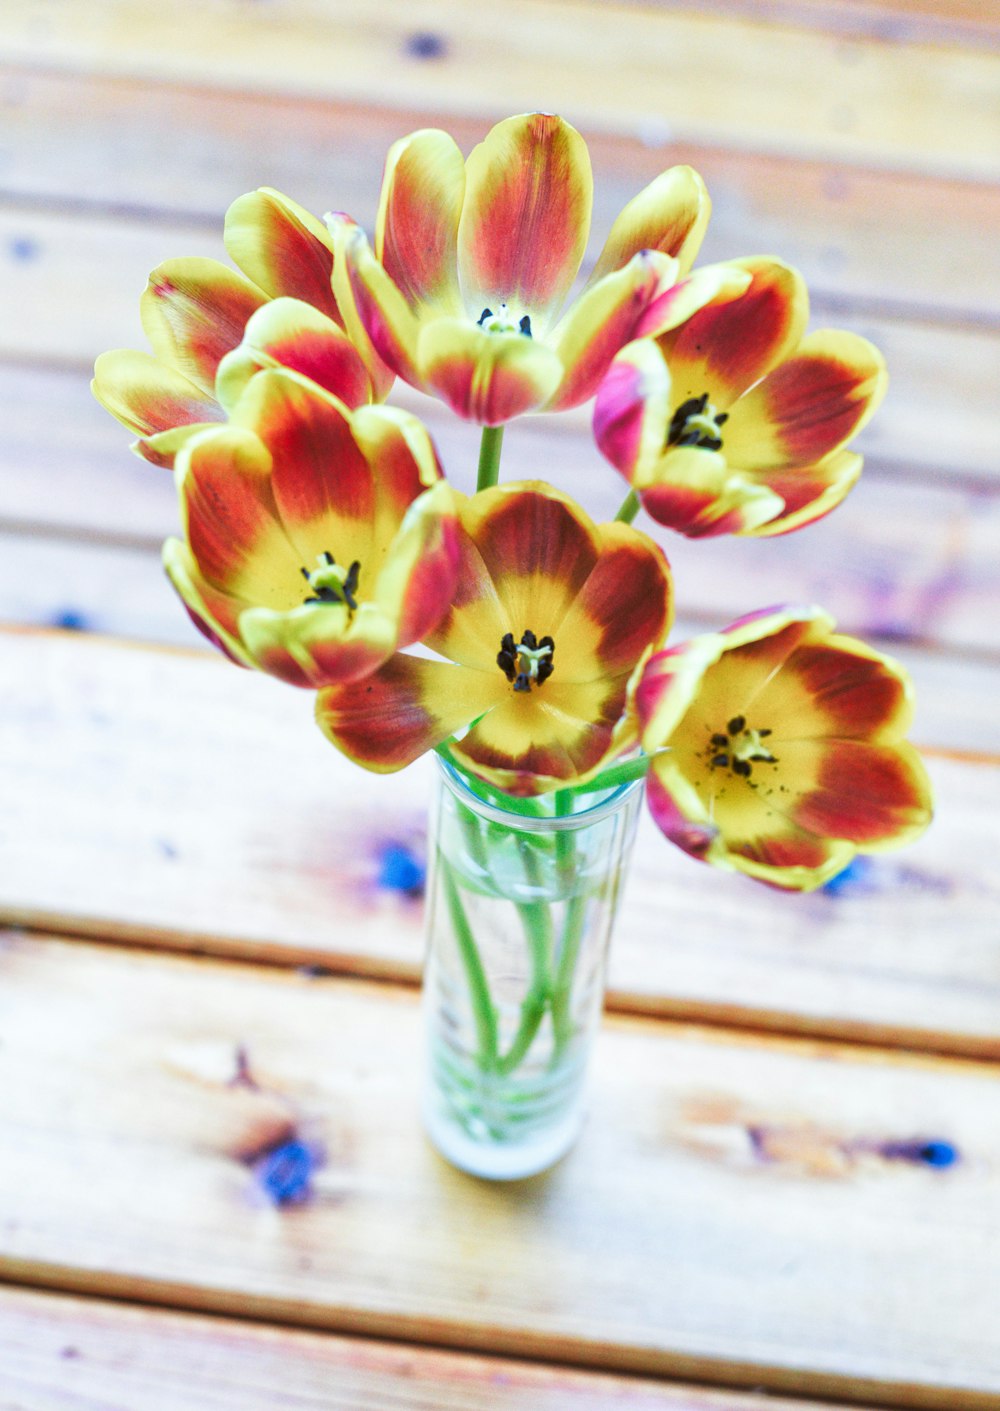 yellow and red flowers in clear glass vase